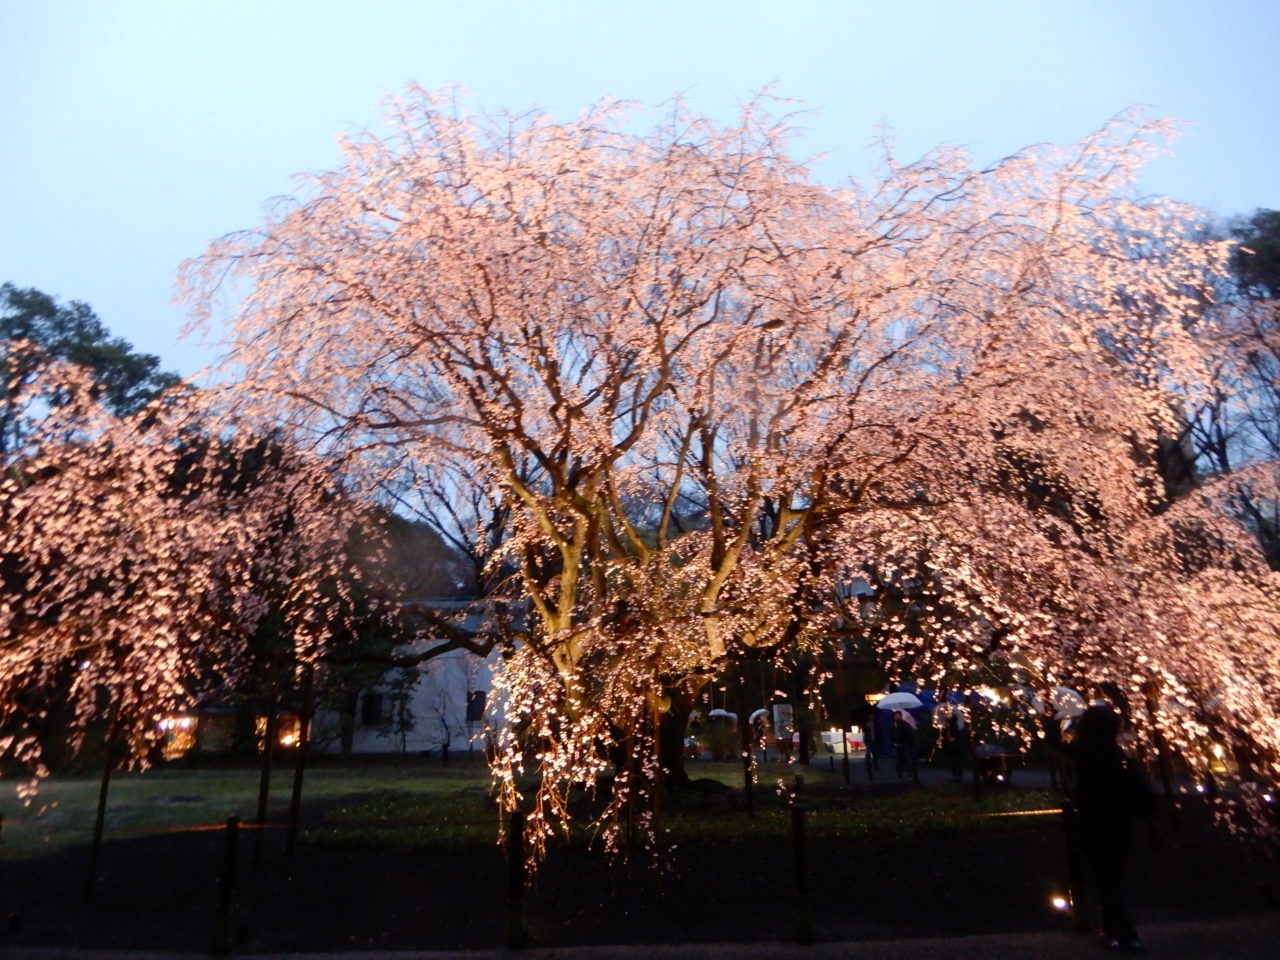 We love cherry blossoms